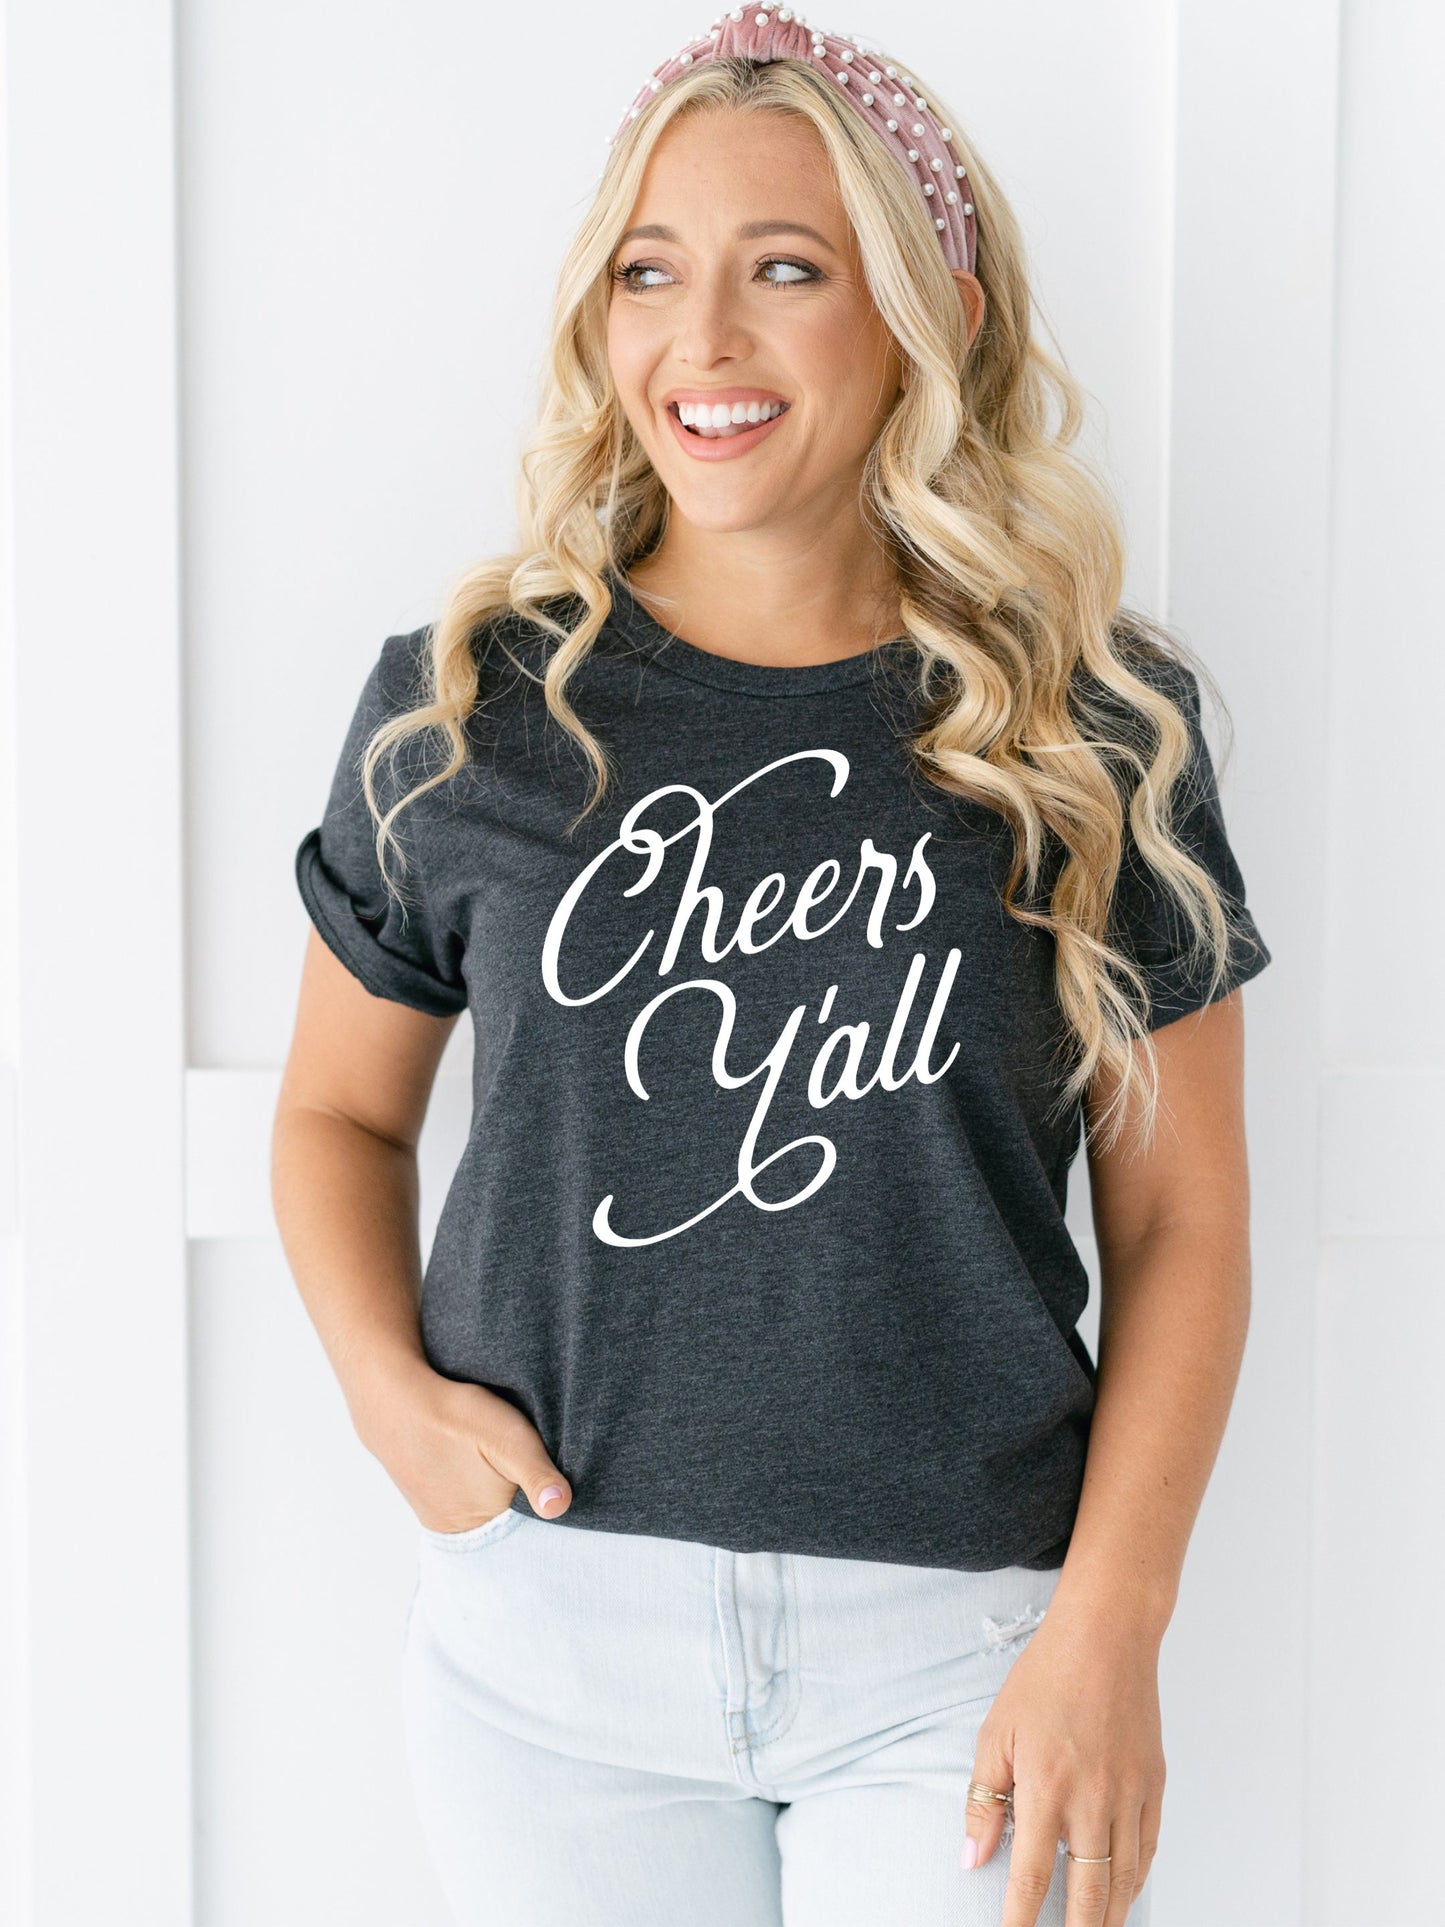 Cheers Y'all T-Shirt for girls weekend or staycation